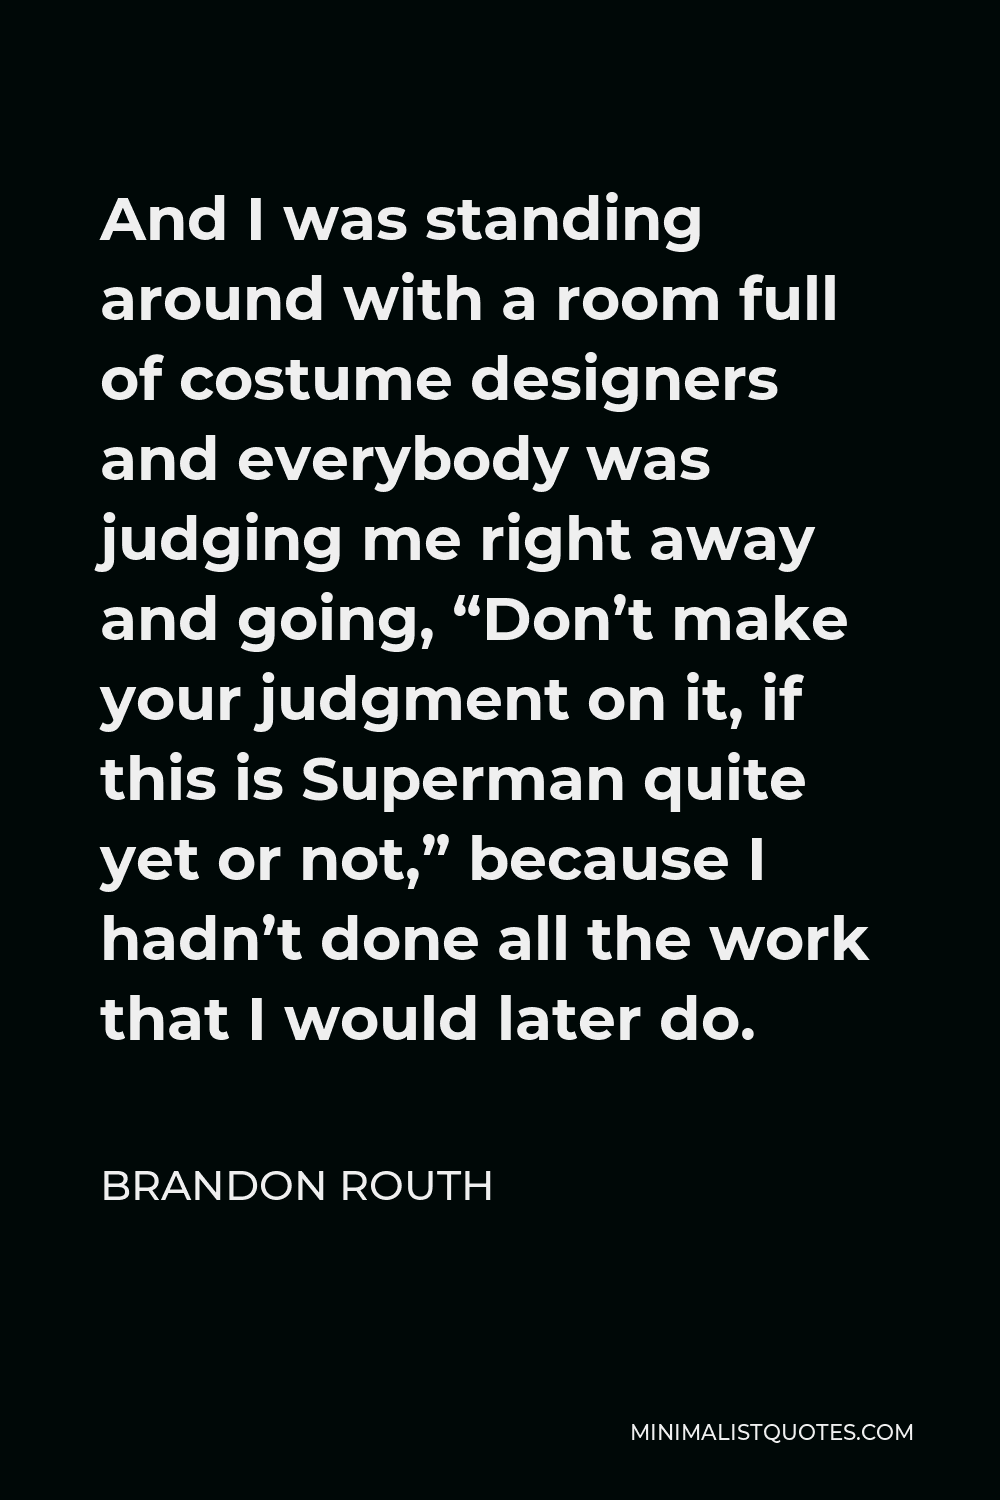 Brandon Routh Quote - And I was standing around with a room full of costume designers and everybody was judging me right away and going, “Don’t make your judgment on it, if this is Superman quite yet or not,” because I hadn’t done all the work that I would later do.